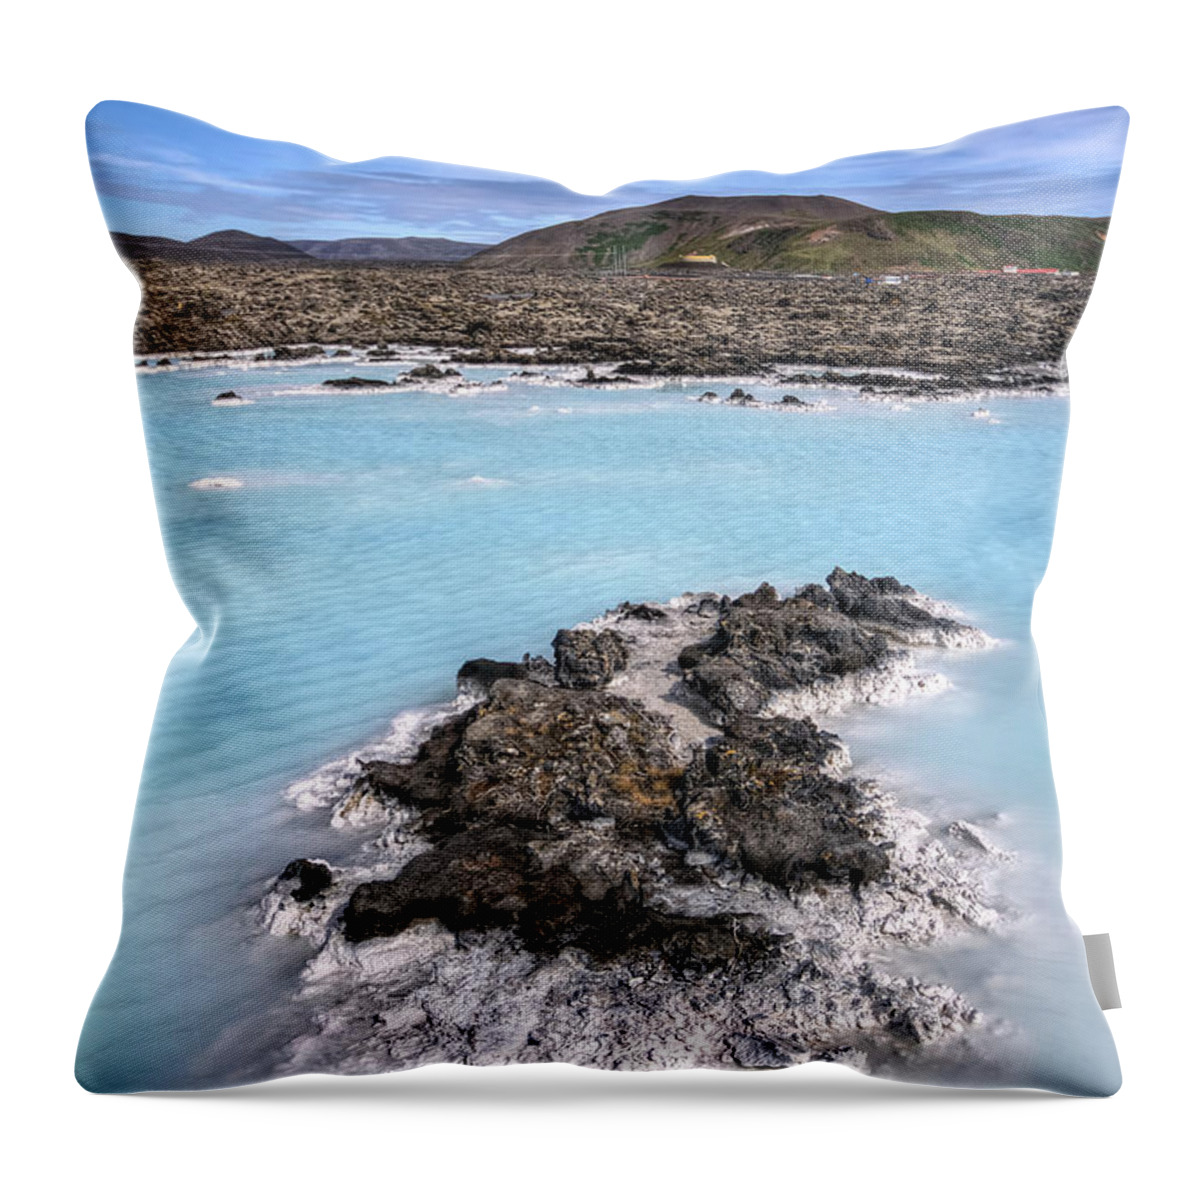 Grindavik Throw Pillow featuring the photograph Pool Of Radiance by Evelina Kremsdorf